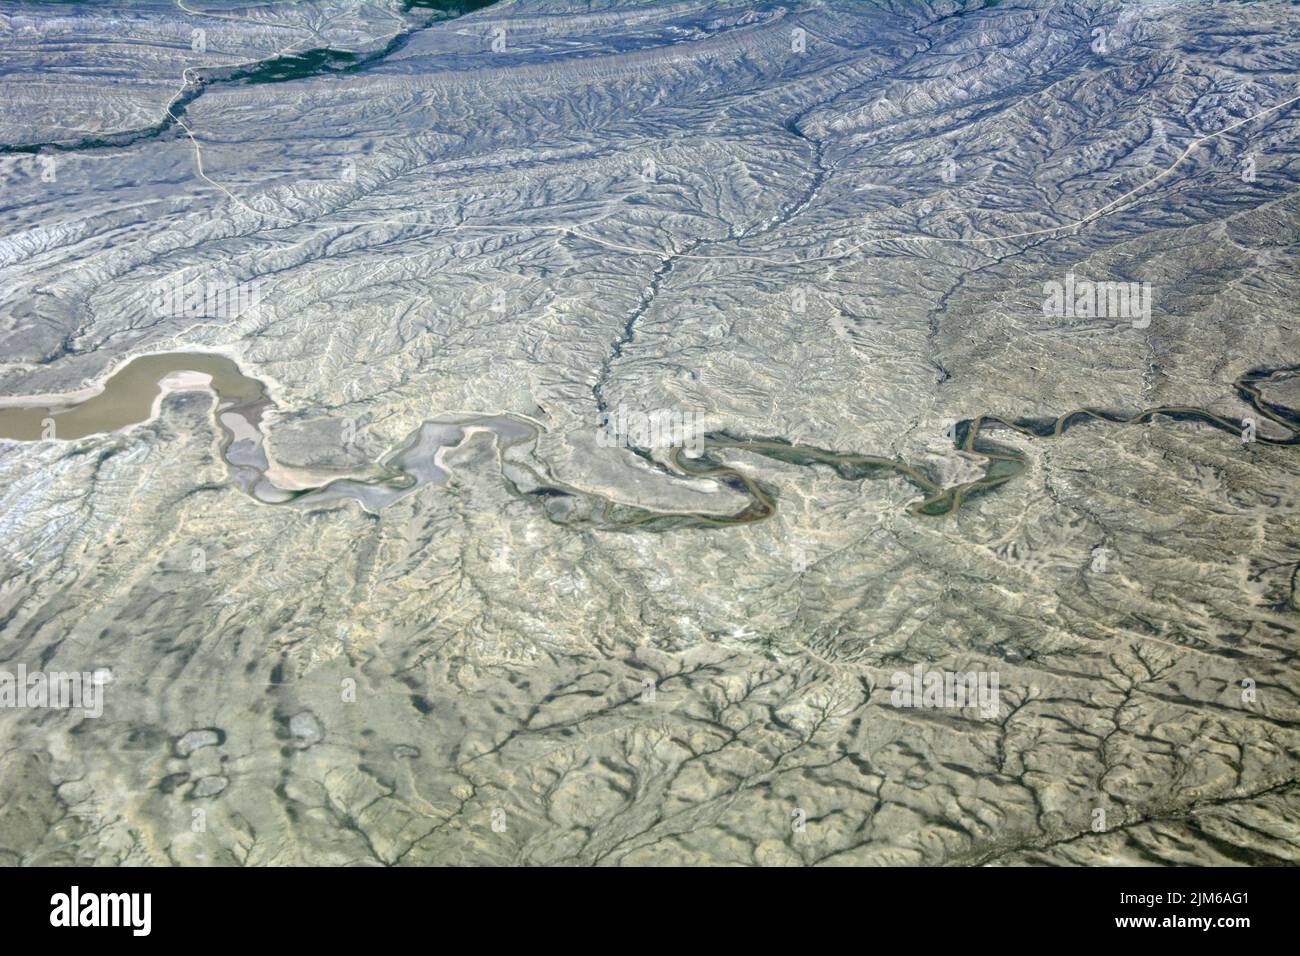 Aerial view of the Medicine Bow River, a tributary of the North Platte, in the semi-arid high desert of Carbon County, southern Wyoming, United States Stock Photo